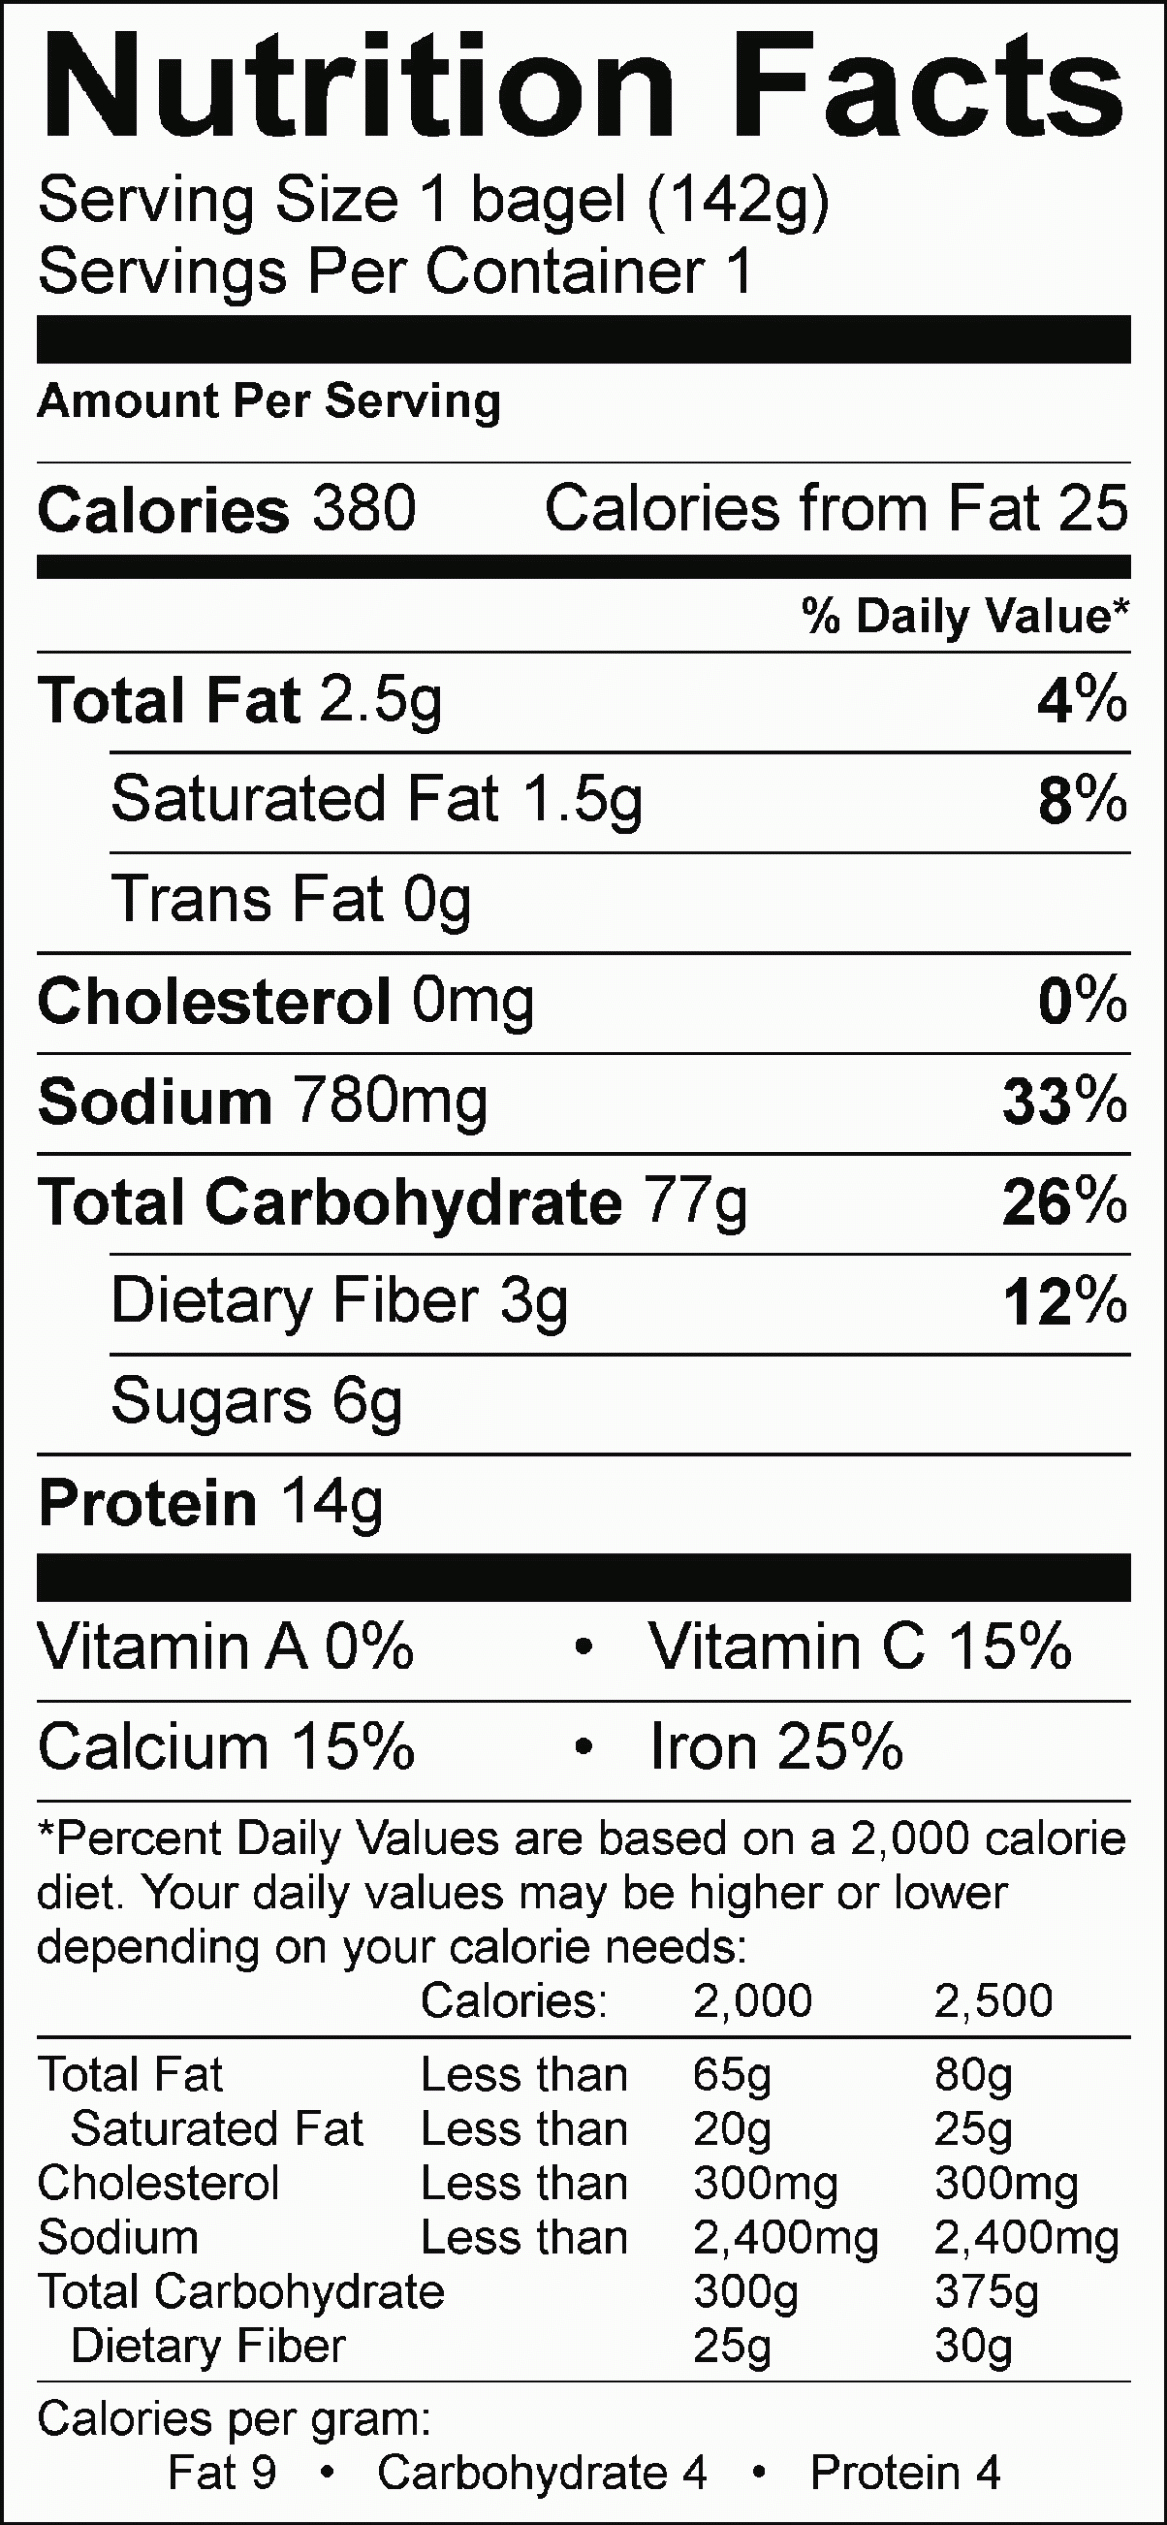 Nutrition Facts Label Template Awesome Nutrition Facts